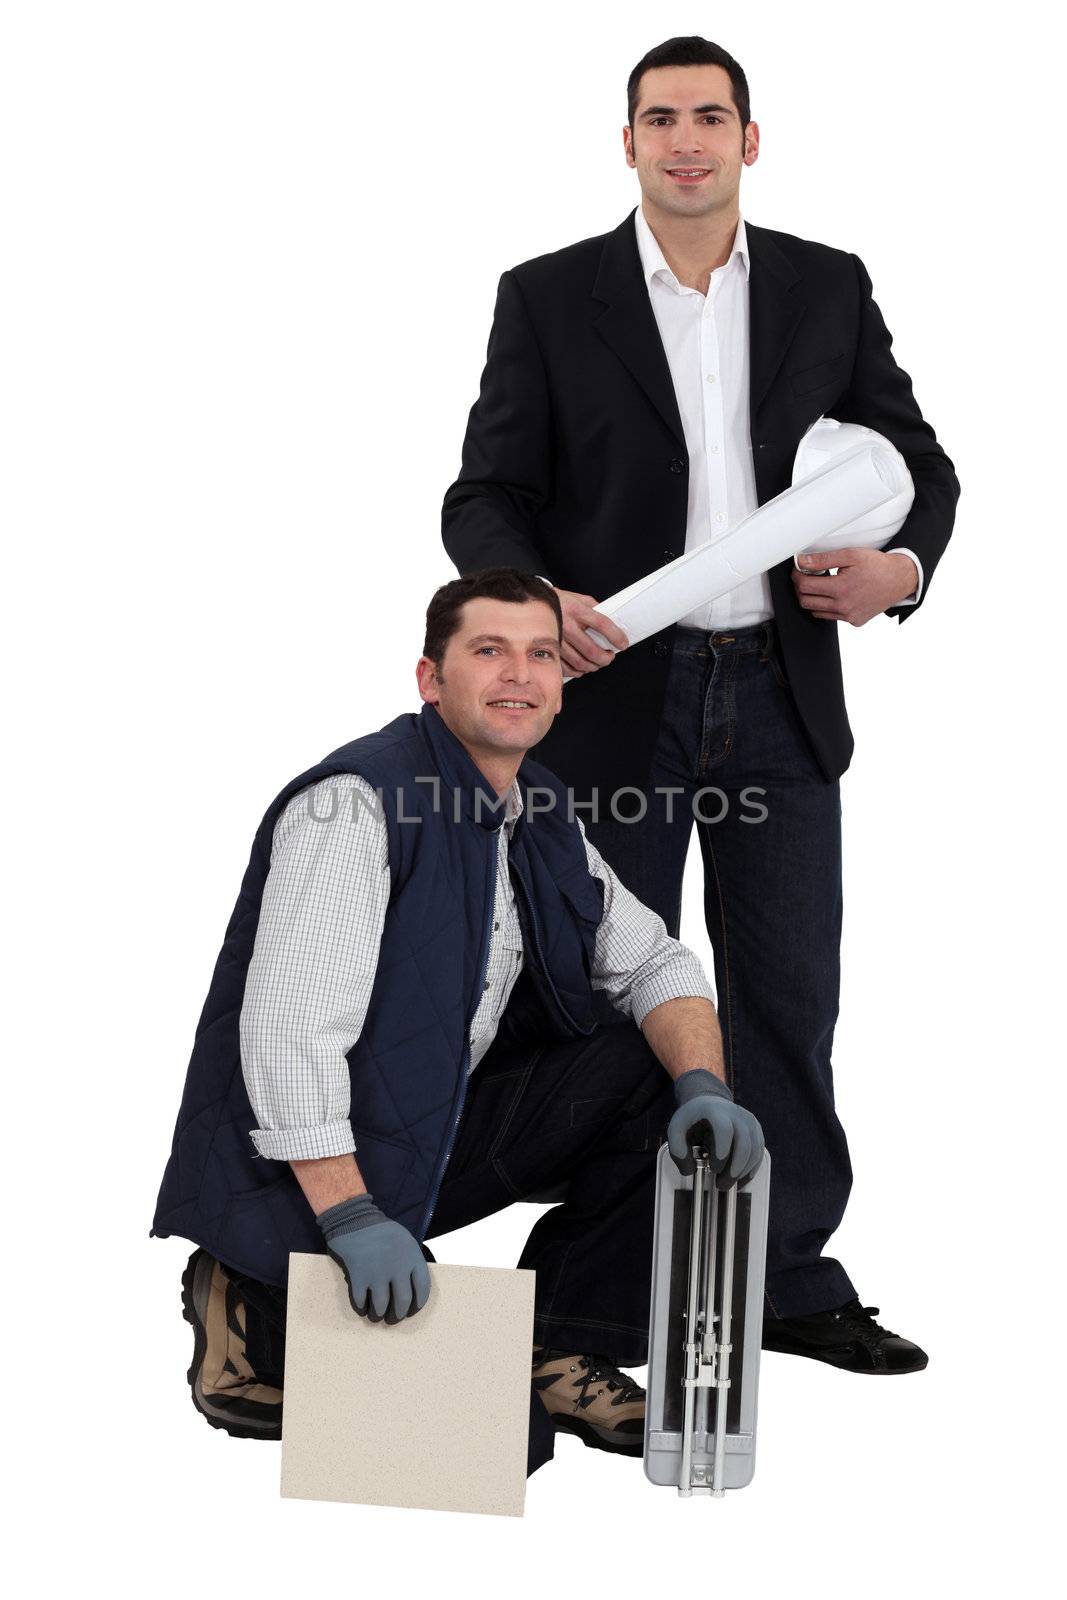 Portrait of an engineer and a workman holding a tile and a ceramic tile cutter